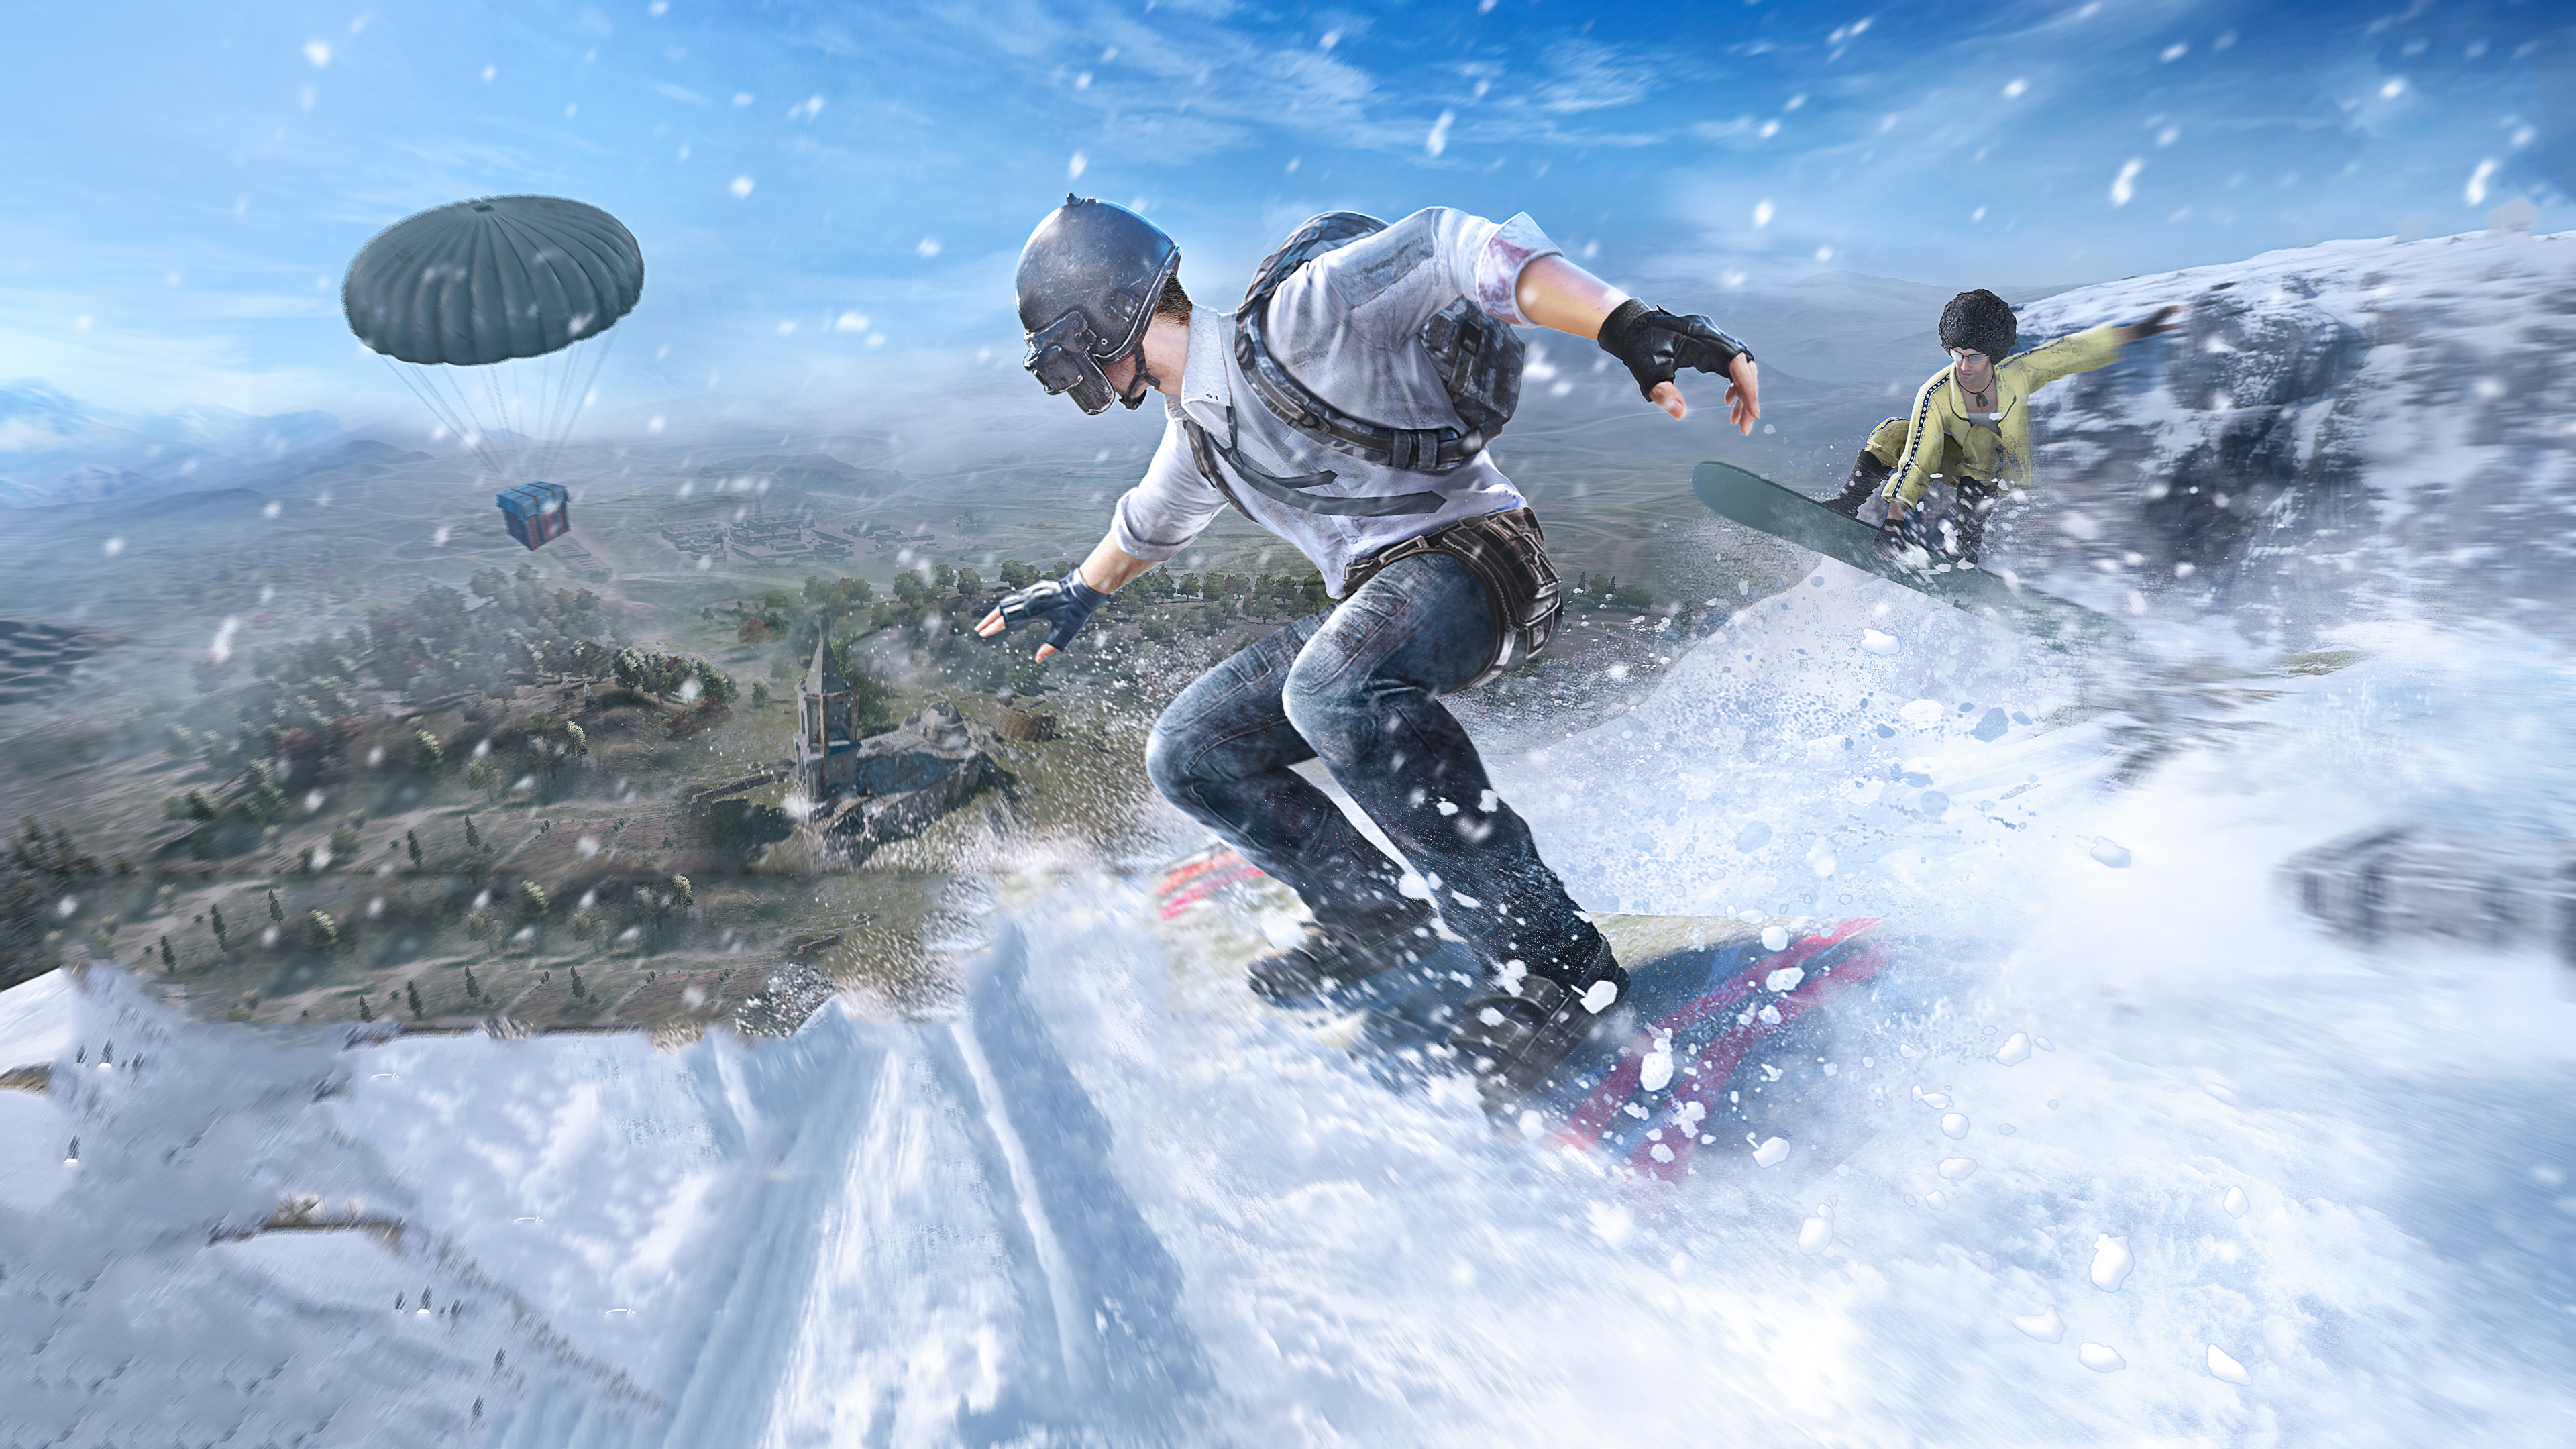 Winter Festival In Pubg Mobile Lite, HD Games, 4k Wallpapers, Images,  Backgrounds, Photos and Pictures